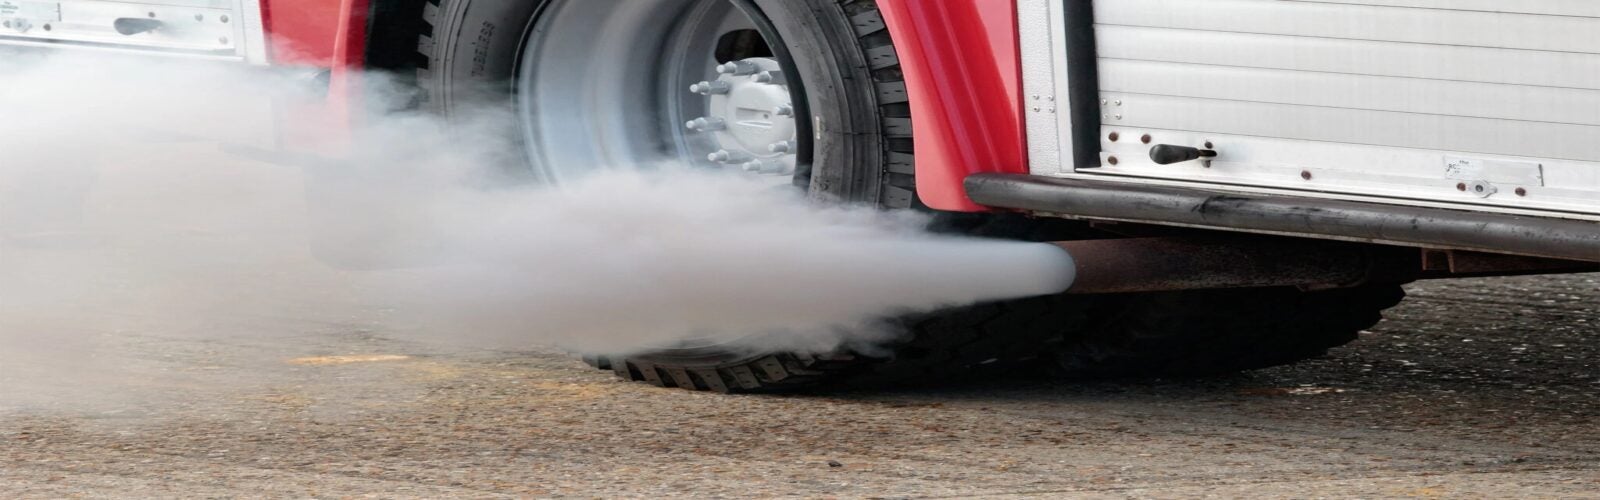 New tool links air pollution with increased risk of dementia